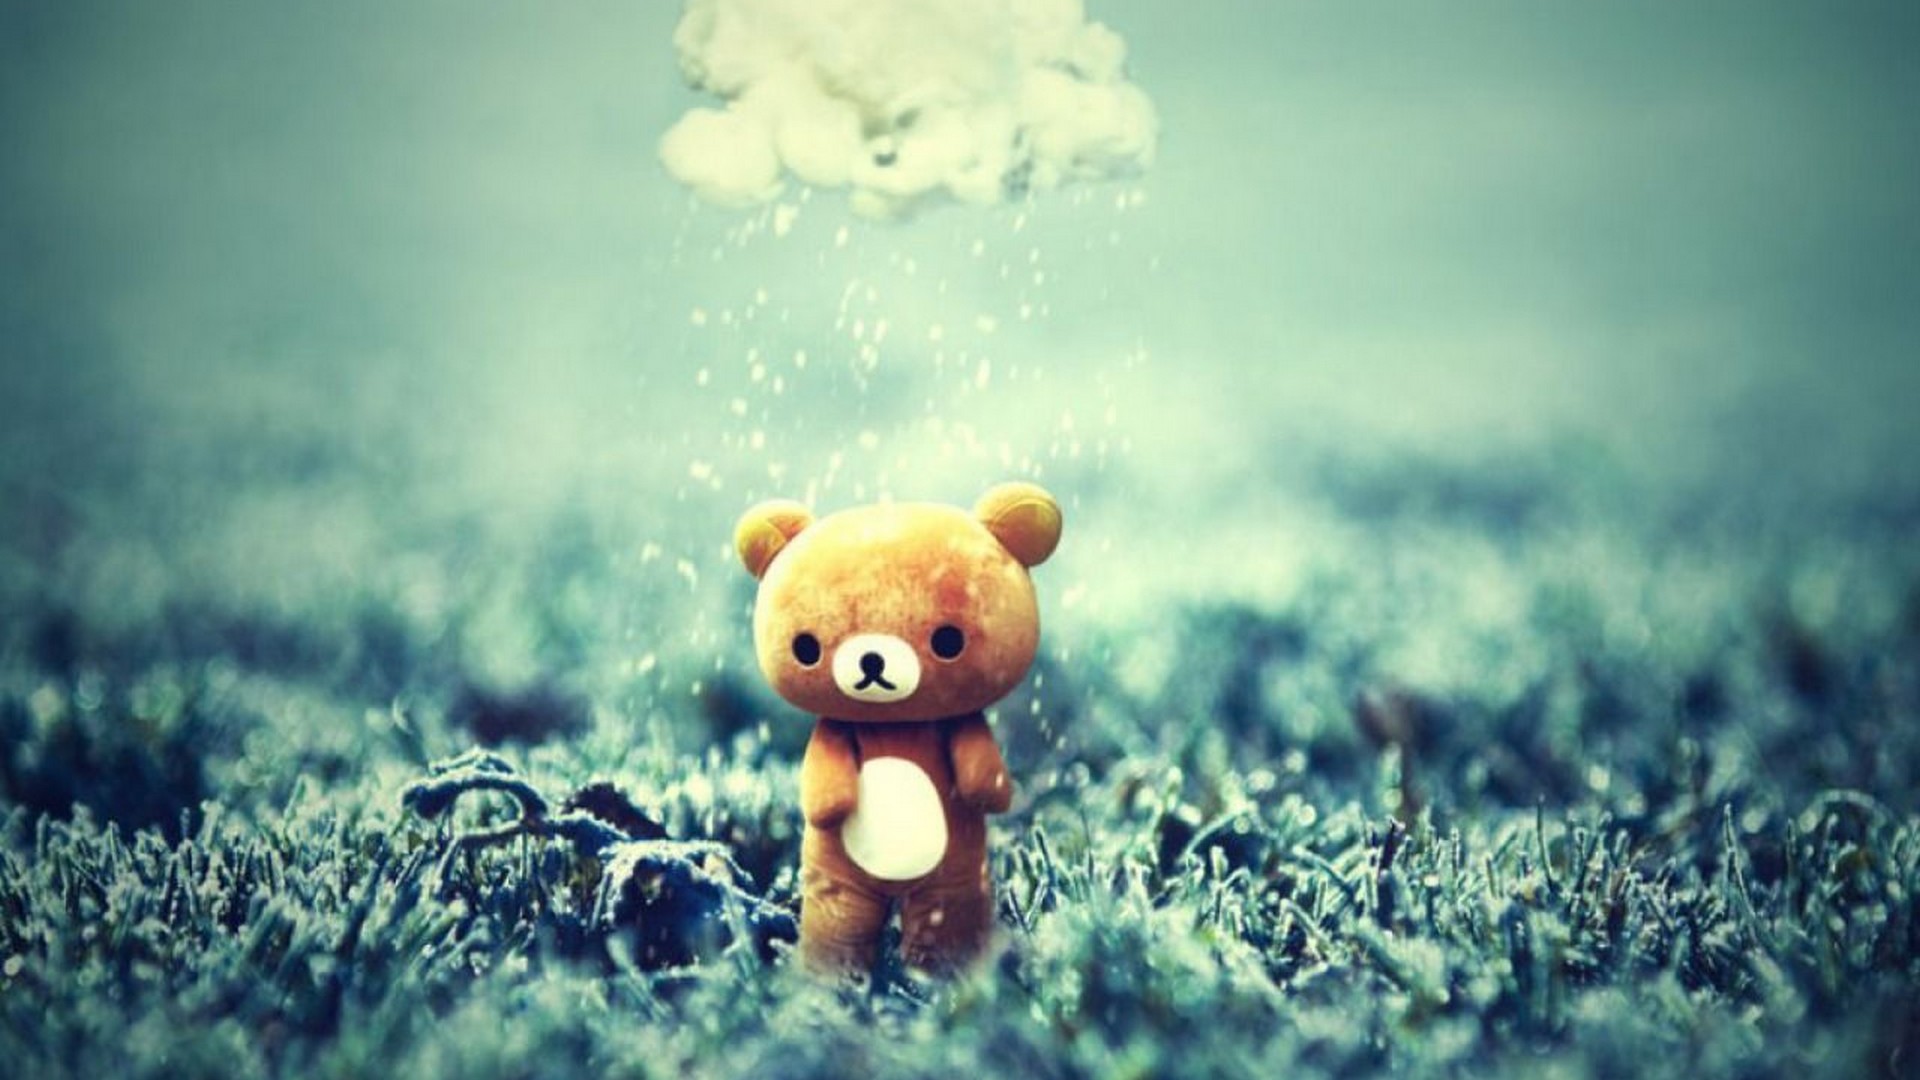 Wallpaper Teddy Bear HD With Resolution 1920X1080 pixel. You can make this wallpaper for your Desktop Computer Backgrounds, Mac Wallpapers, Android Lock screen or iPhone Screensavers